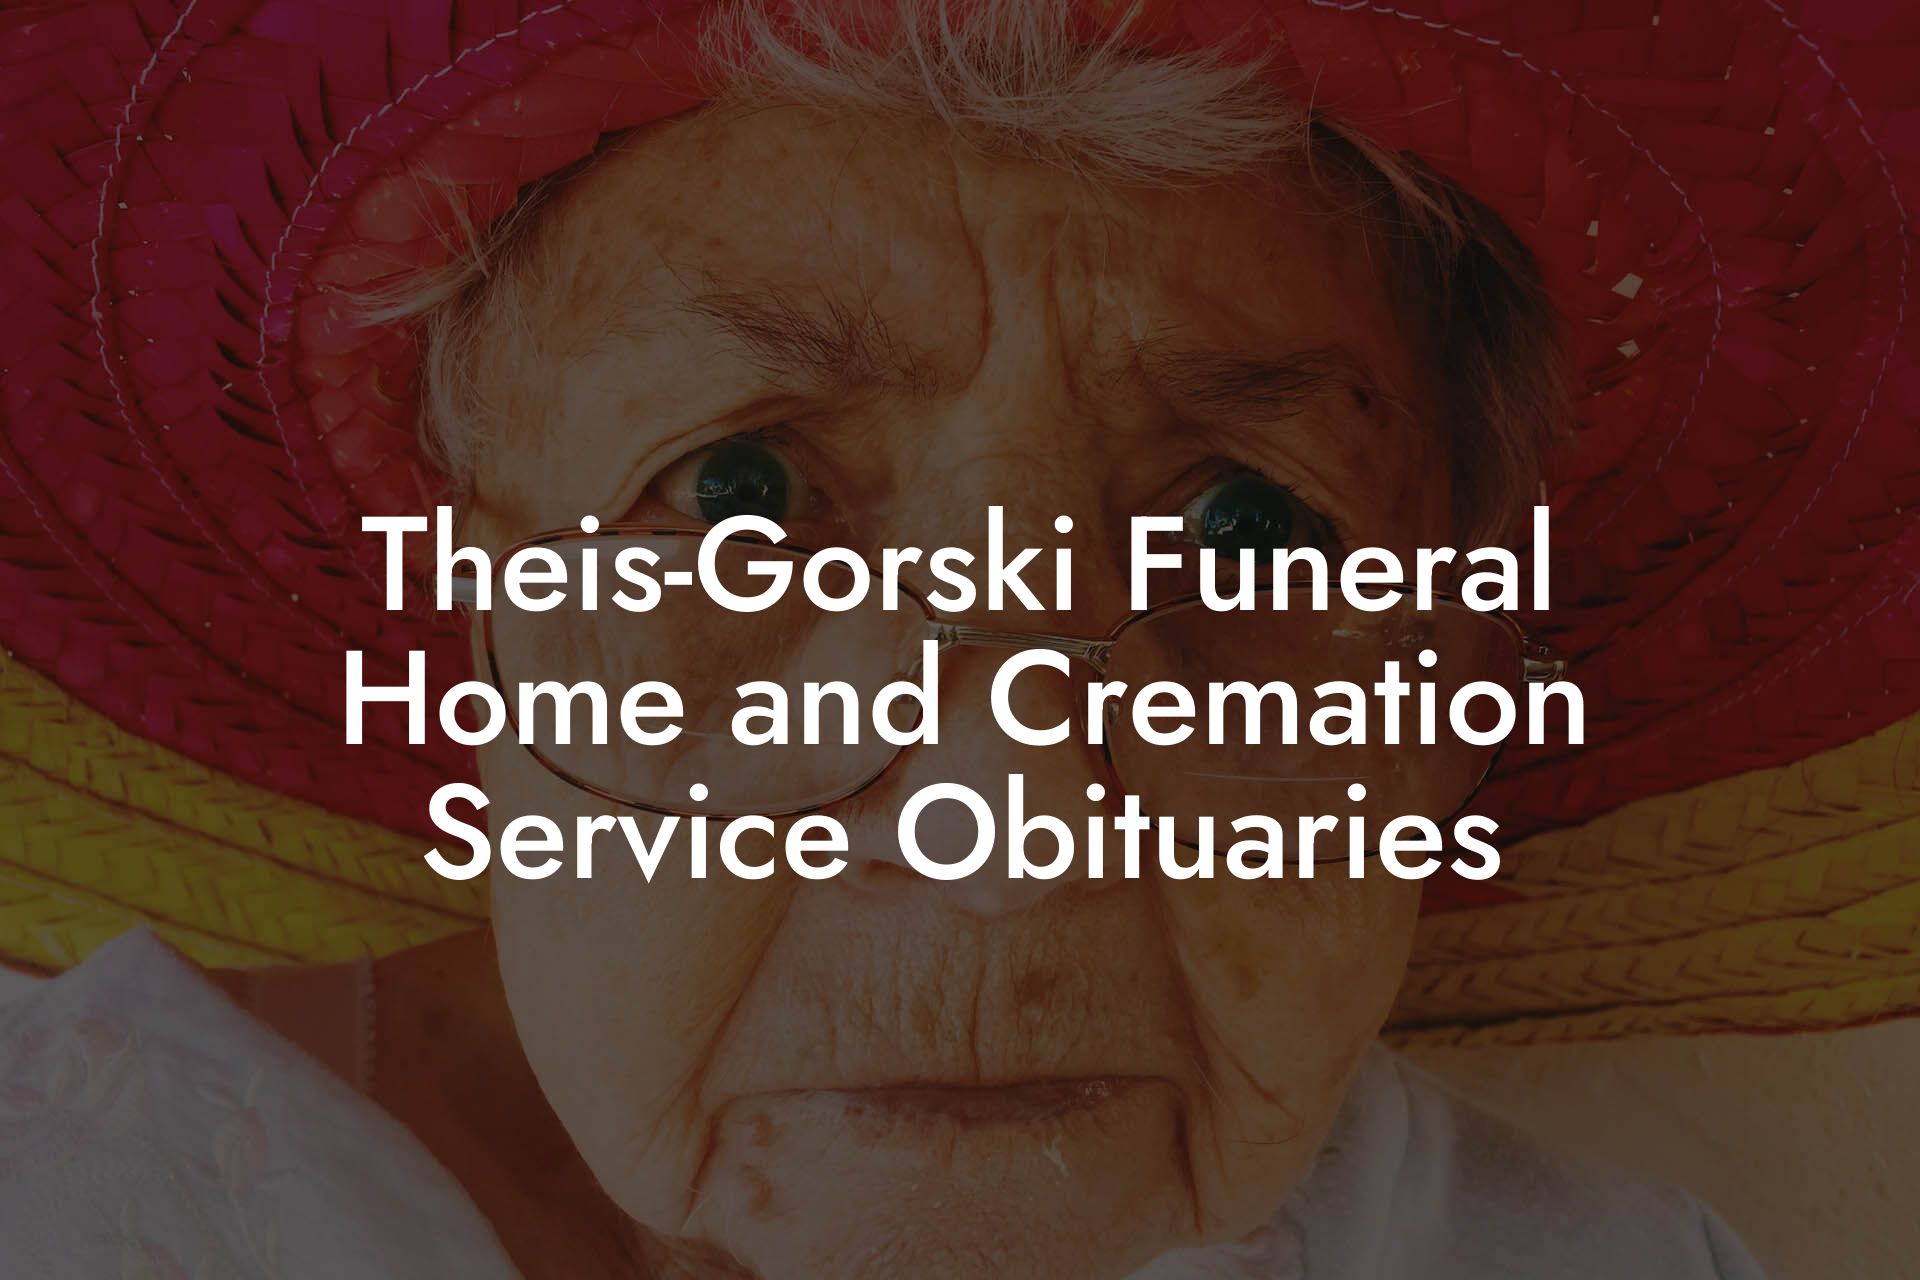 Theis-Gorski Funeral Home and Cremation Service Obituaries